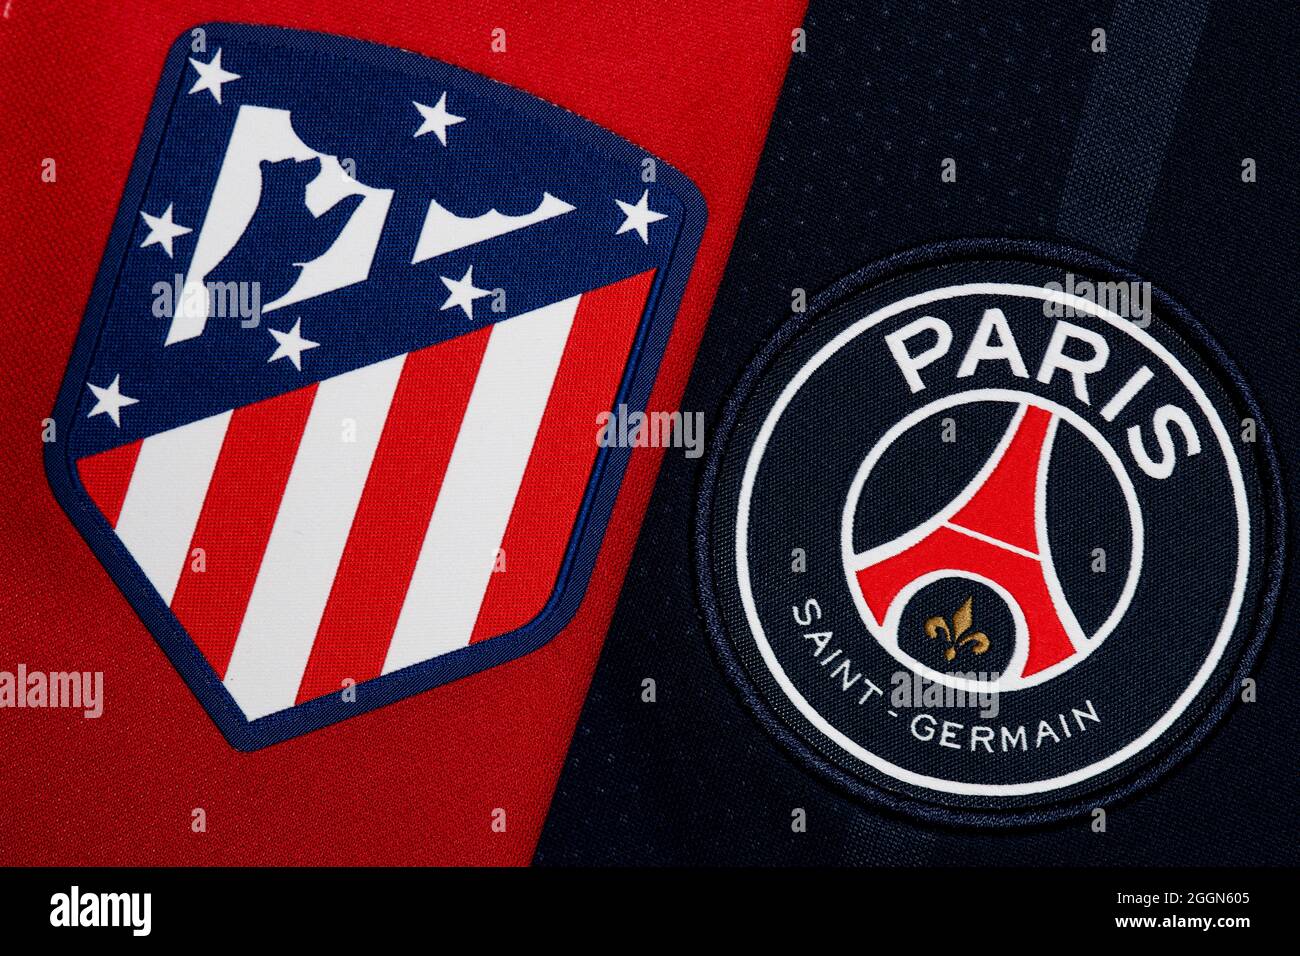 Atletico Madrid Football Club Flag and Coat of Arms Team in the New Super  League Championship Editorial Stock Photo - Illustration of football,  atletico: 216645283